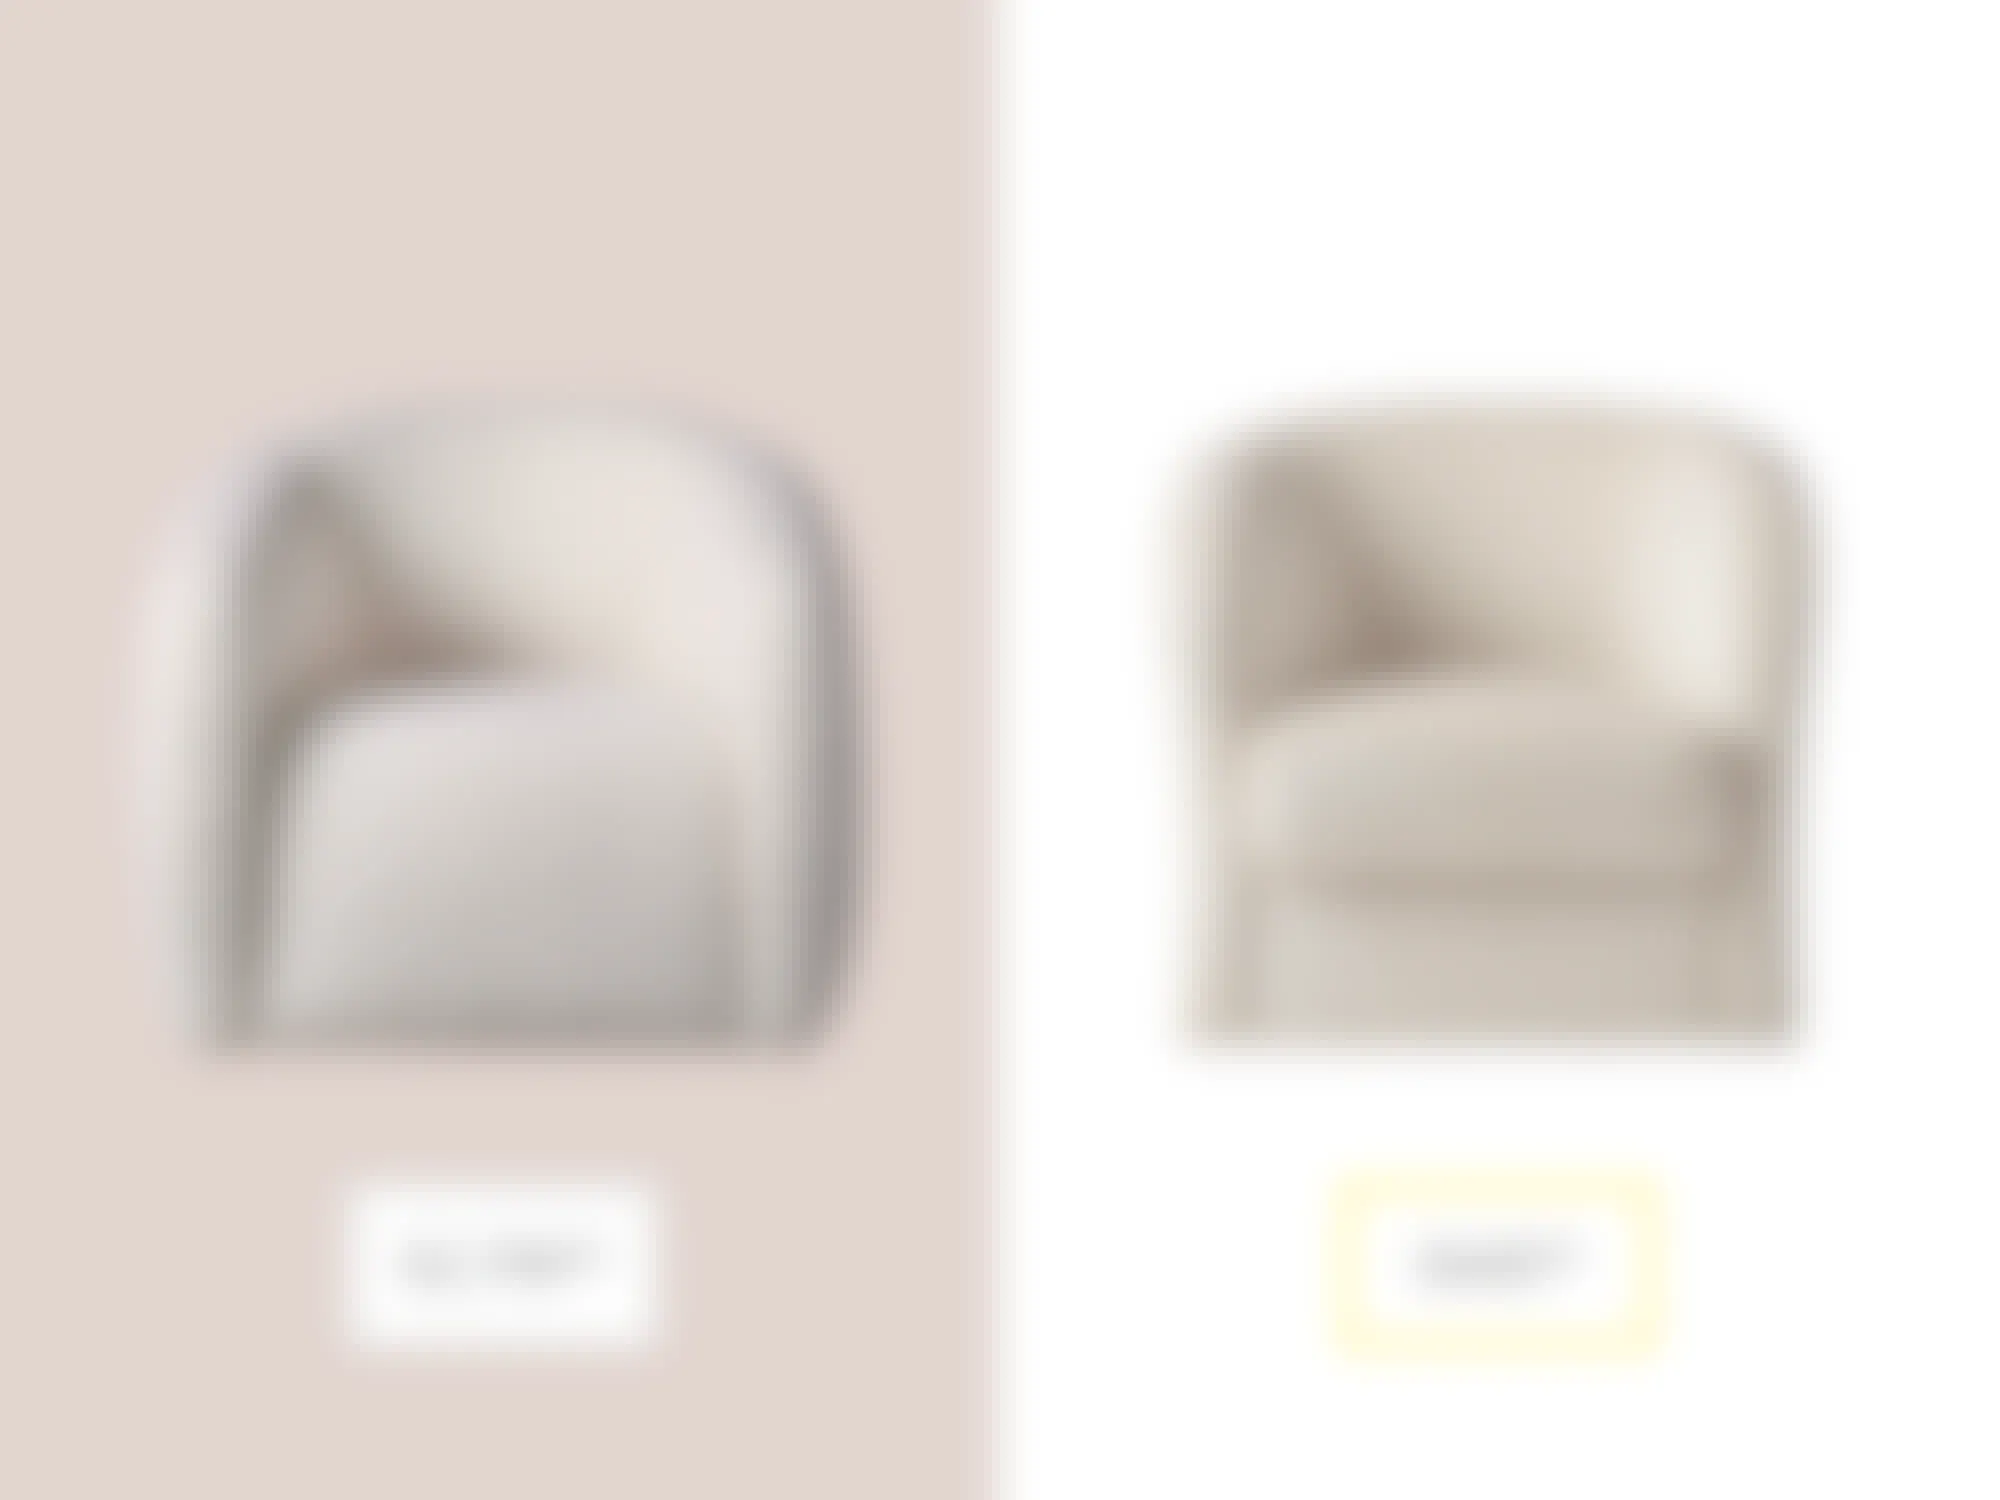 arhaus and world market swivel chairs with prices graphic